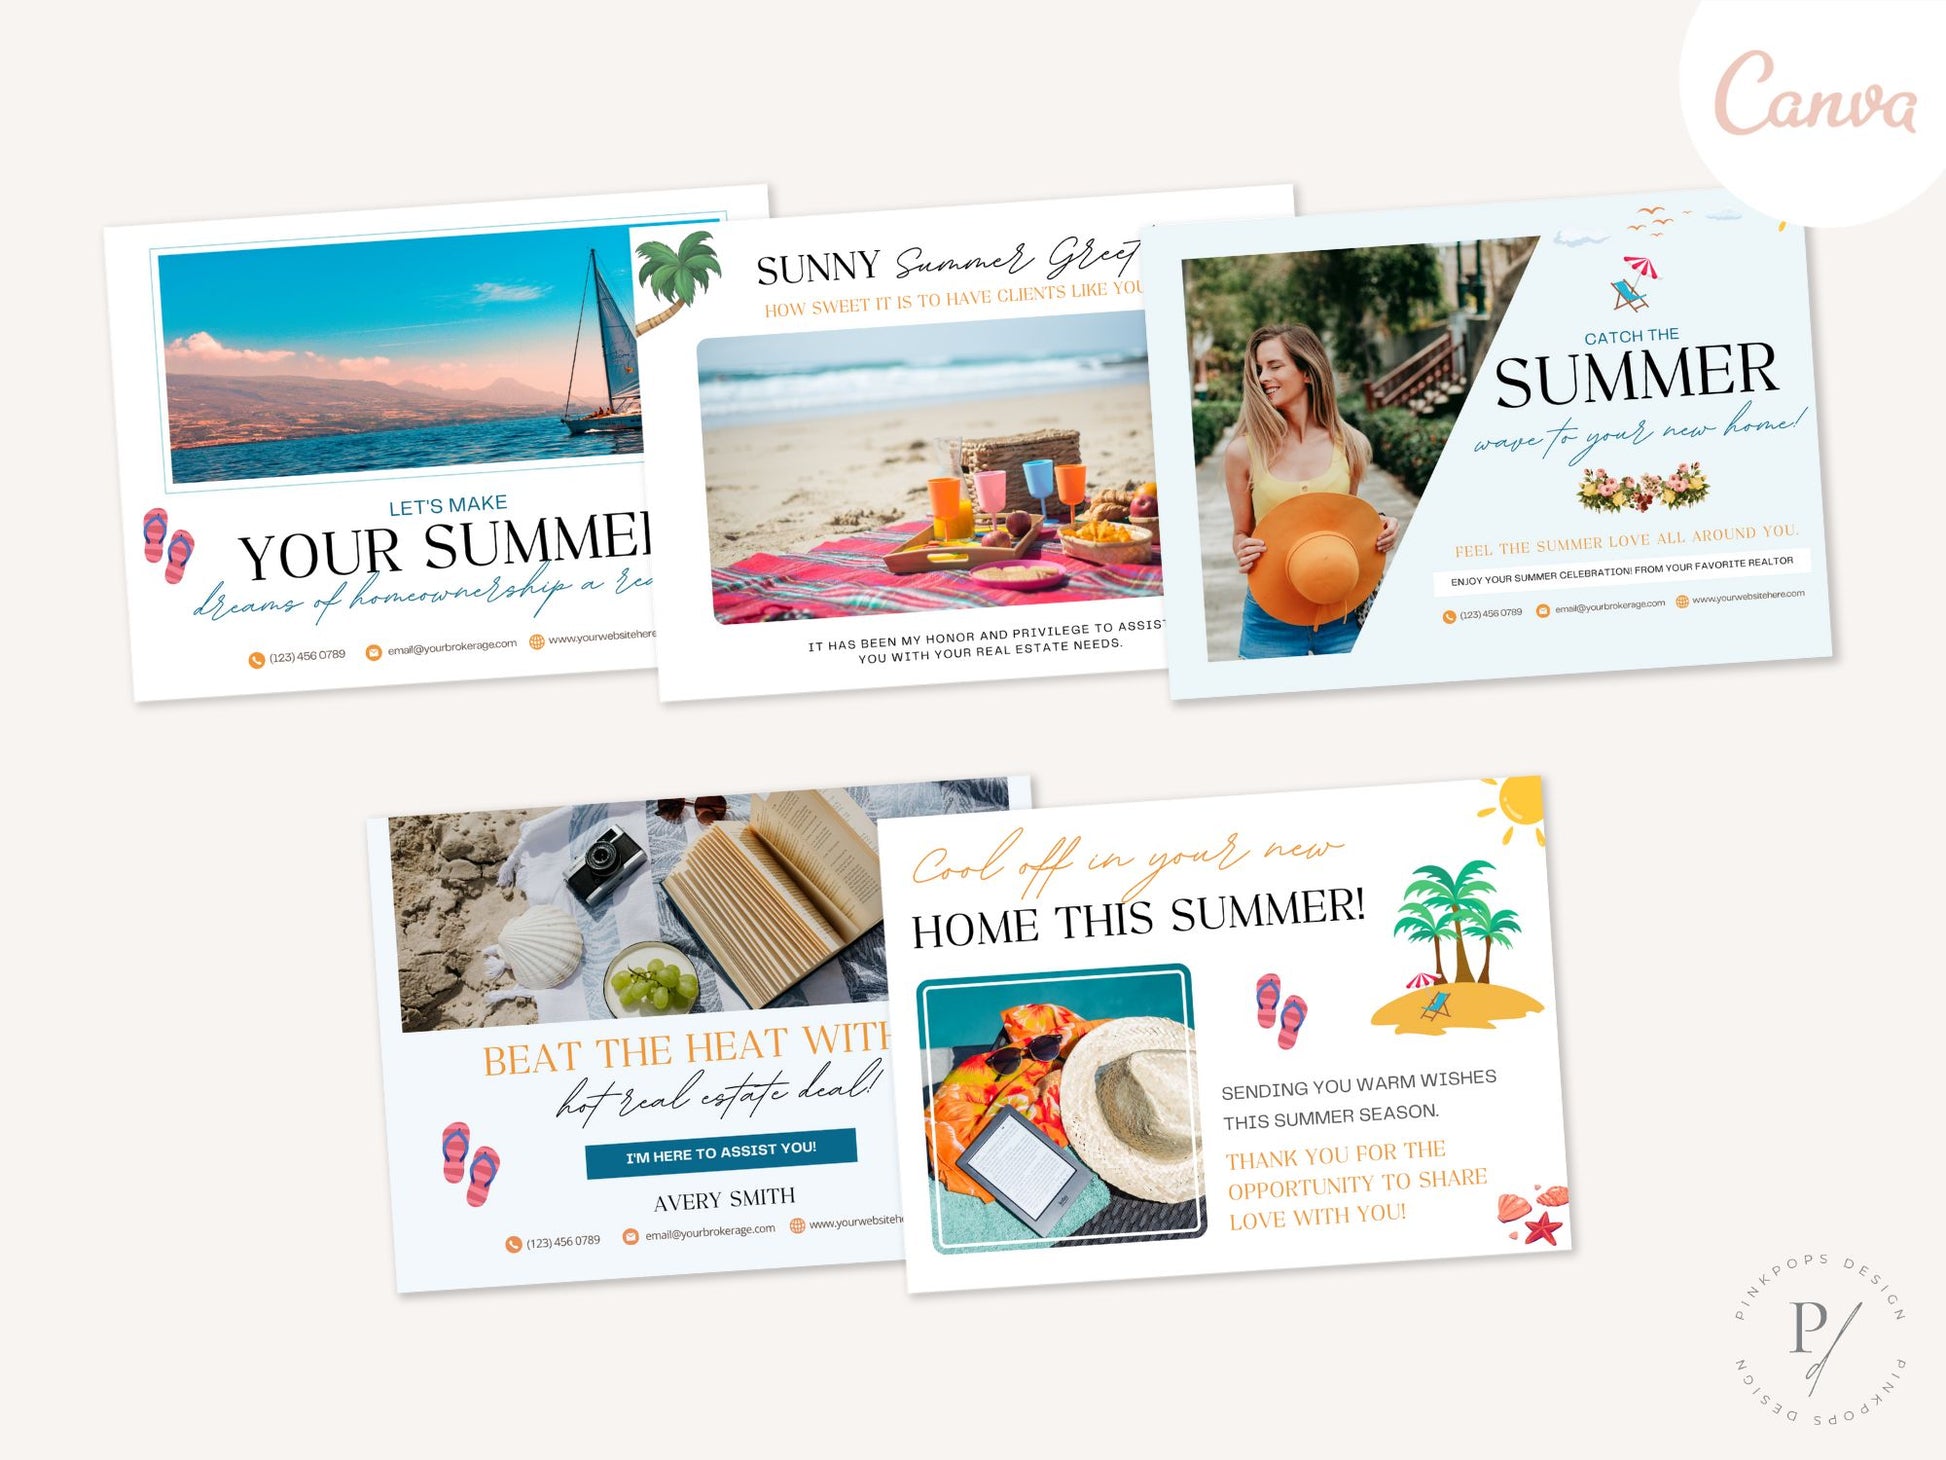 Summer Postcard Bundle - Vibrant designs perfect for staying connected with clients and prospects during the sunny season.